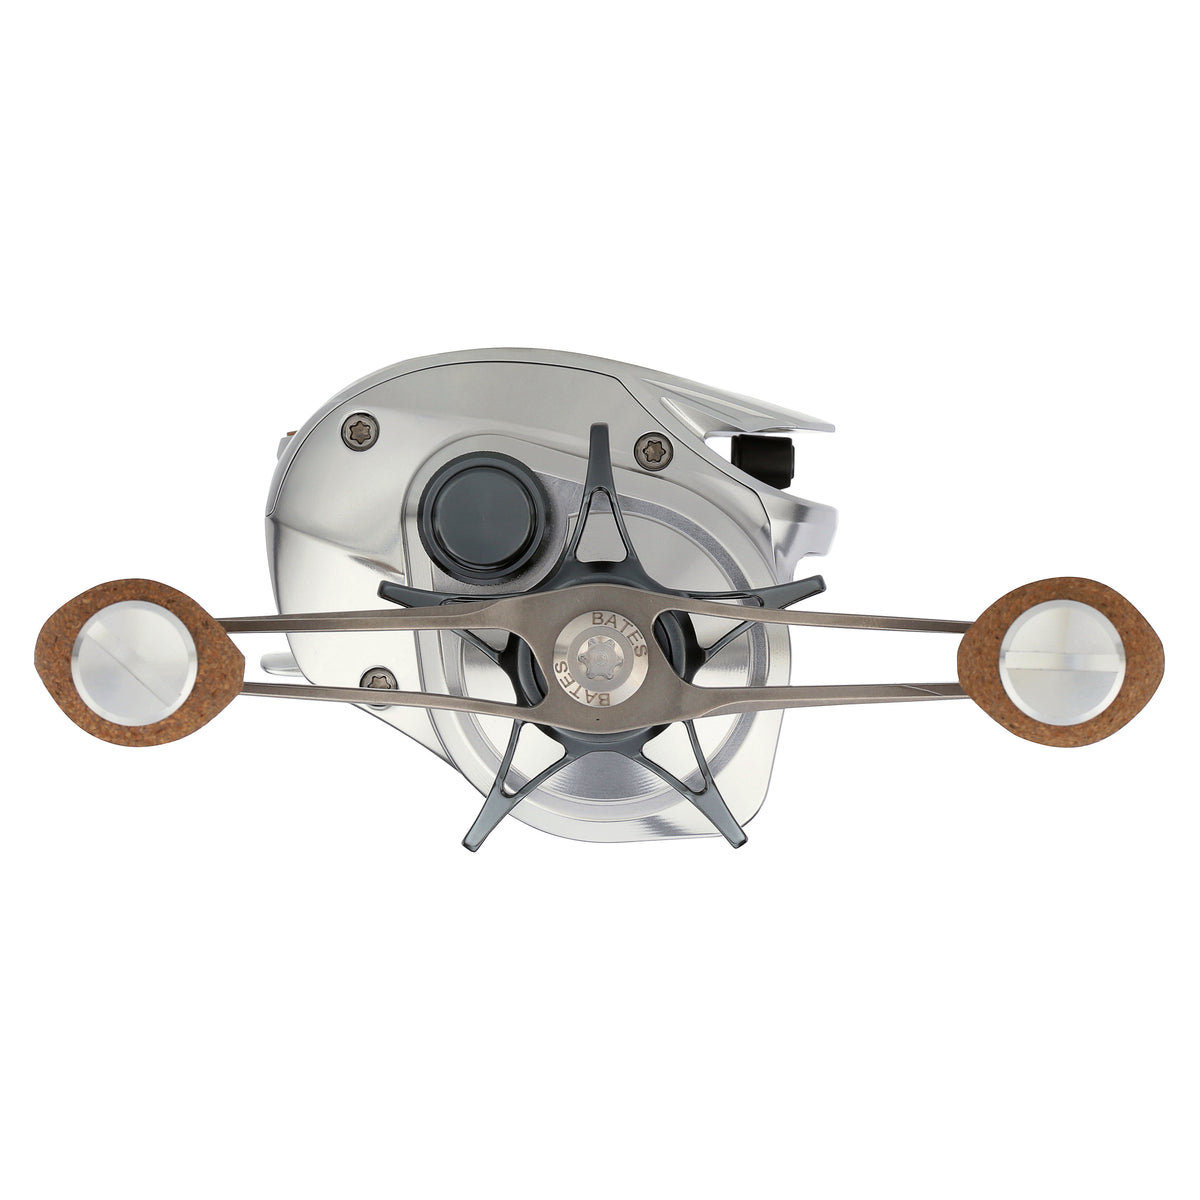 Baitcasting Reel THE GOAT 6.3:1 - Anodized Clear